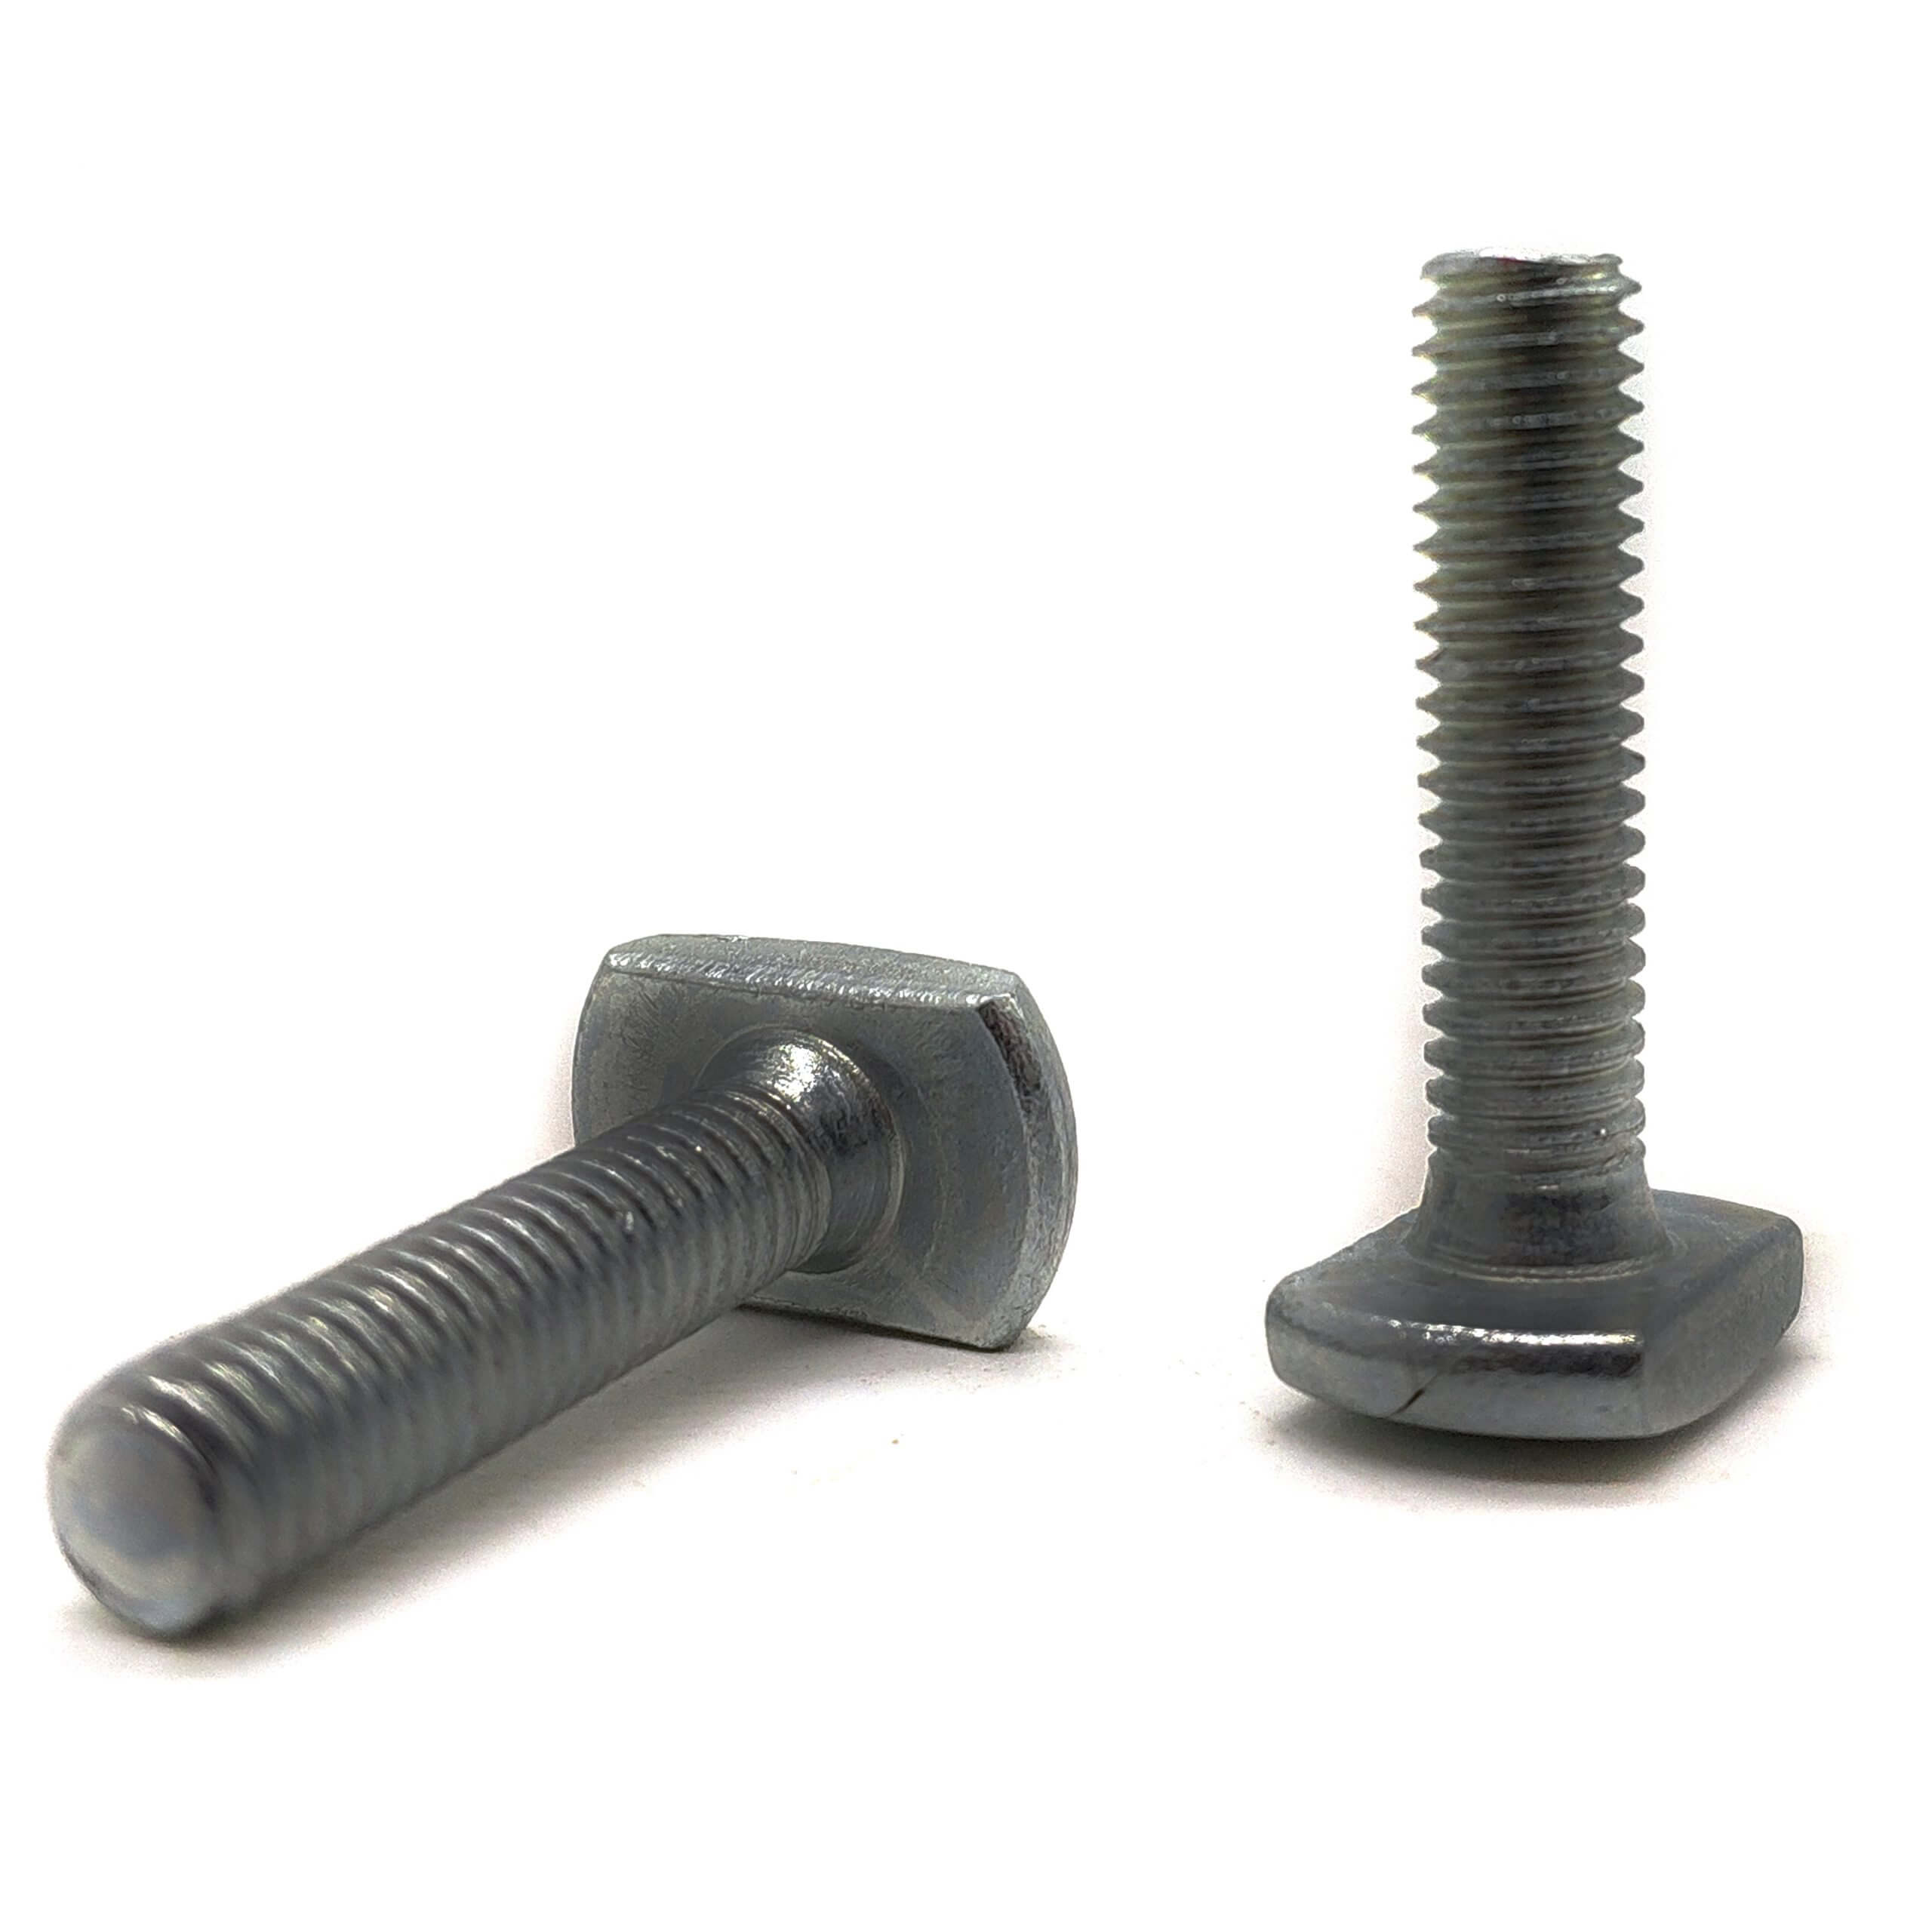 T handle bolts